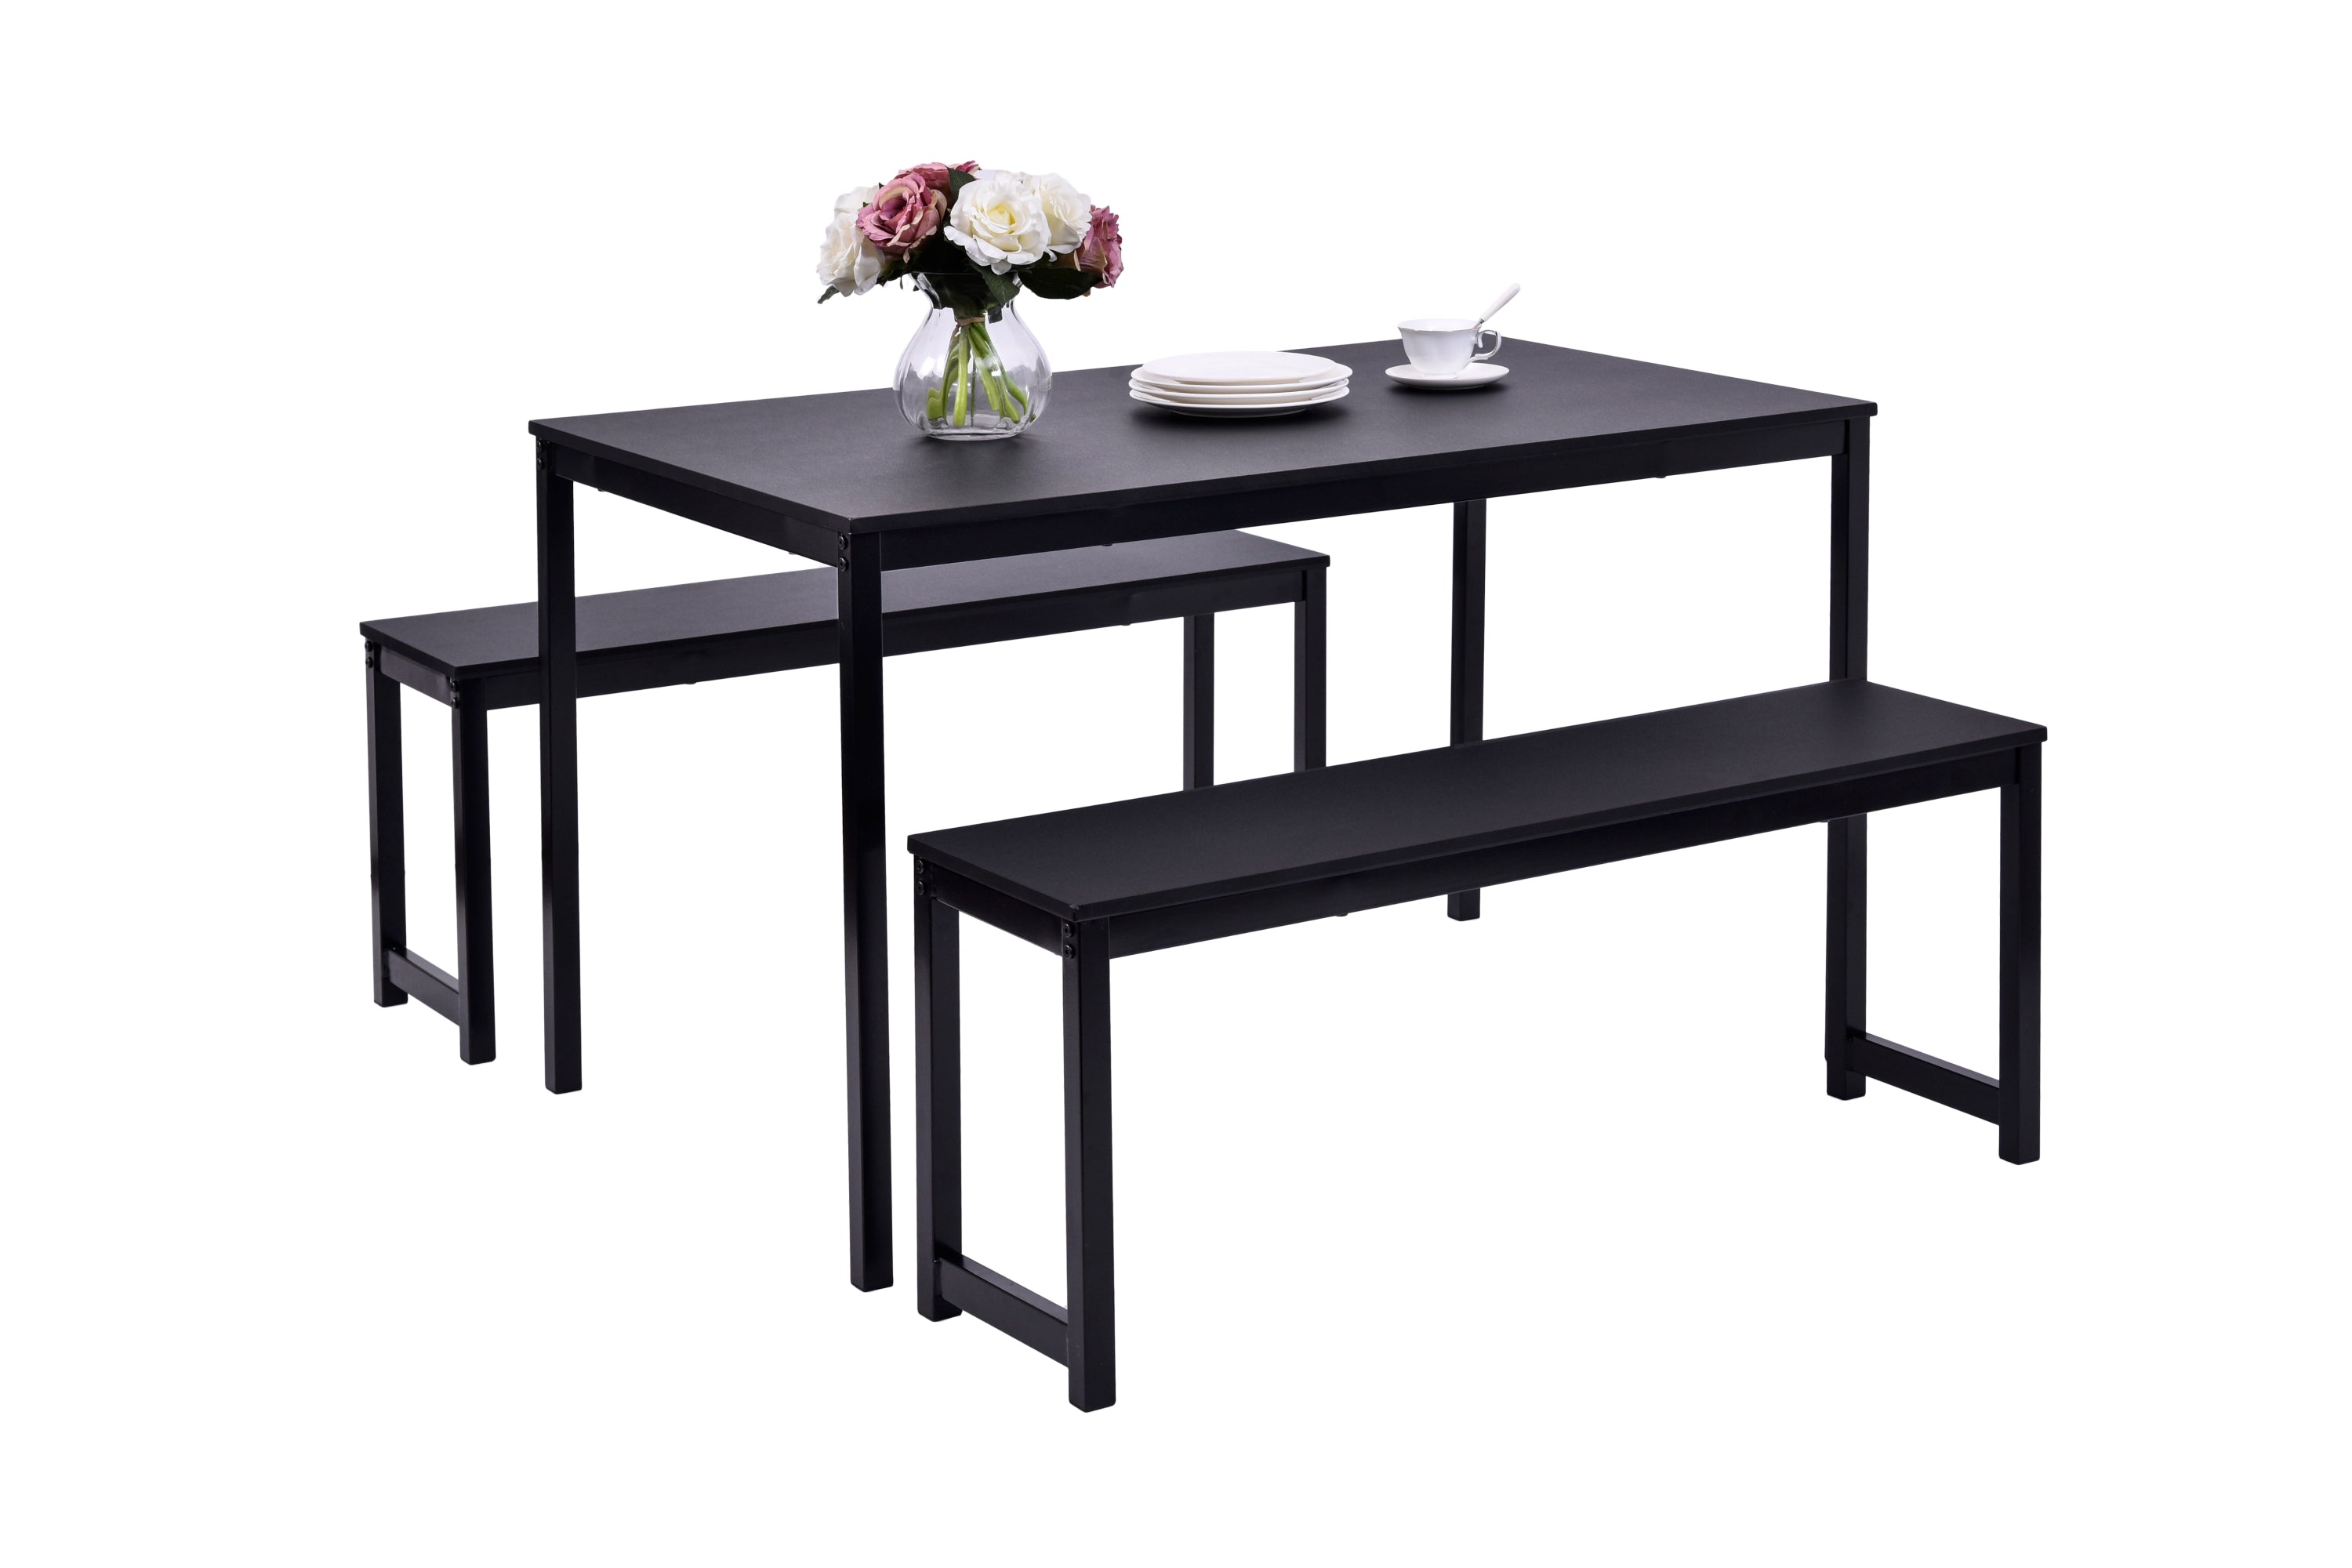 U_STYLE 3 Piece Dining set with Two benches, Modern Dining Room Furniture